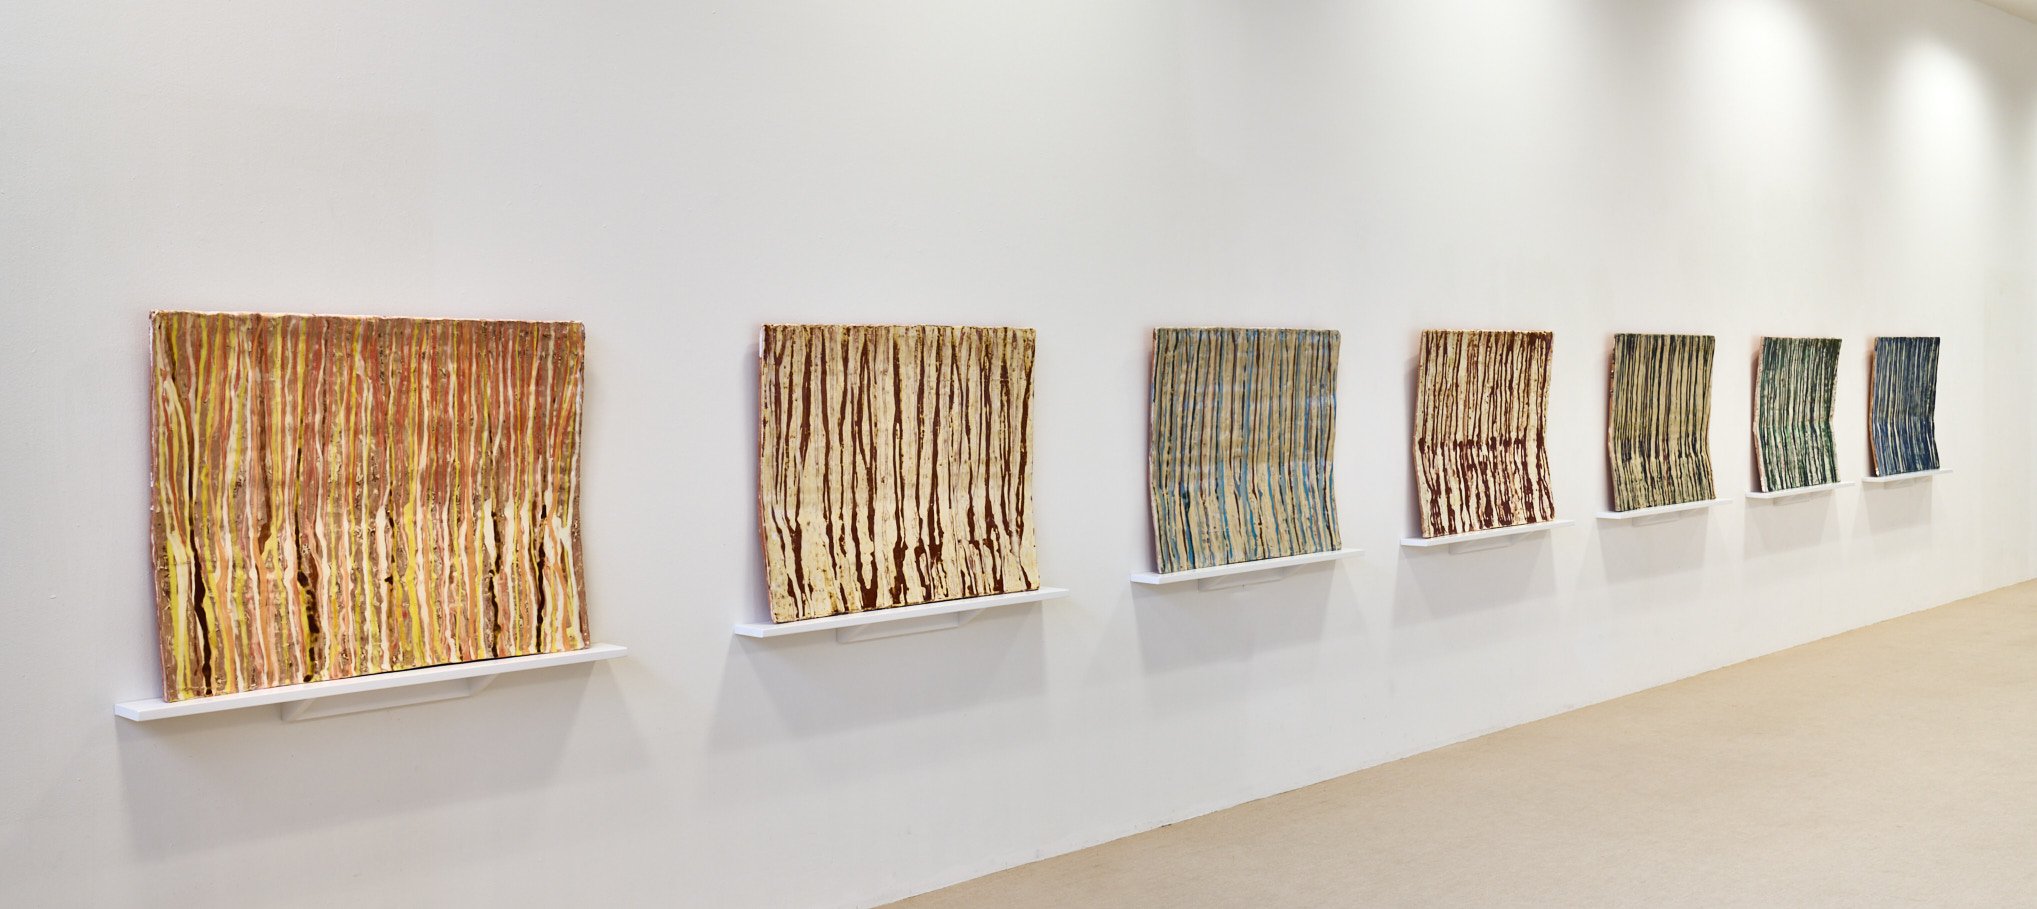 Installation View of the Standing Tiles Series at National Ceramic Museum Westerwald, Germany 2021